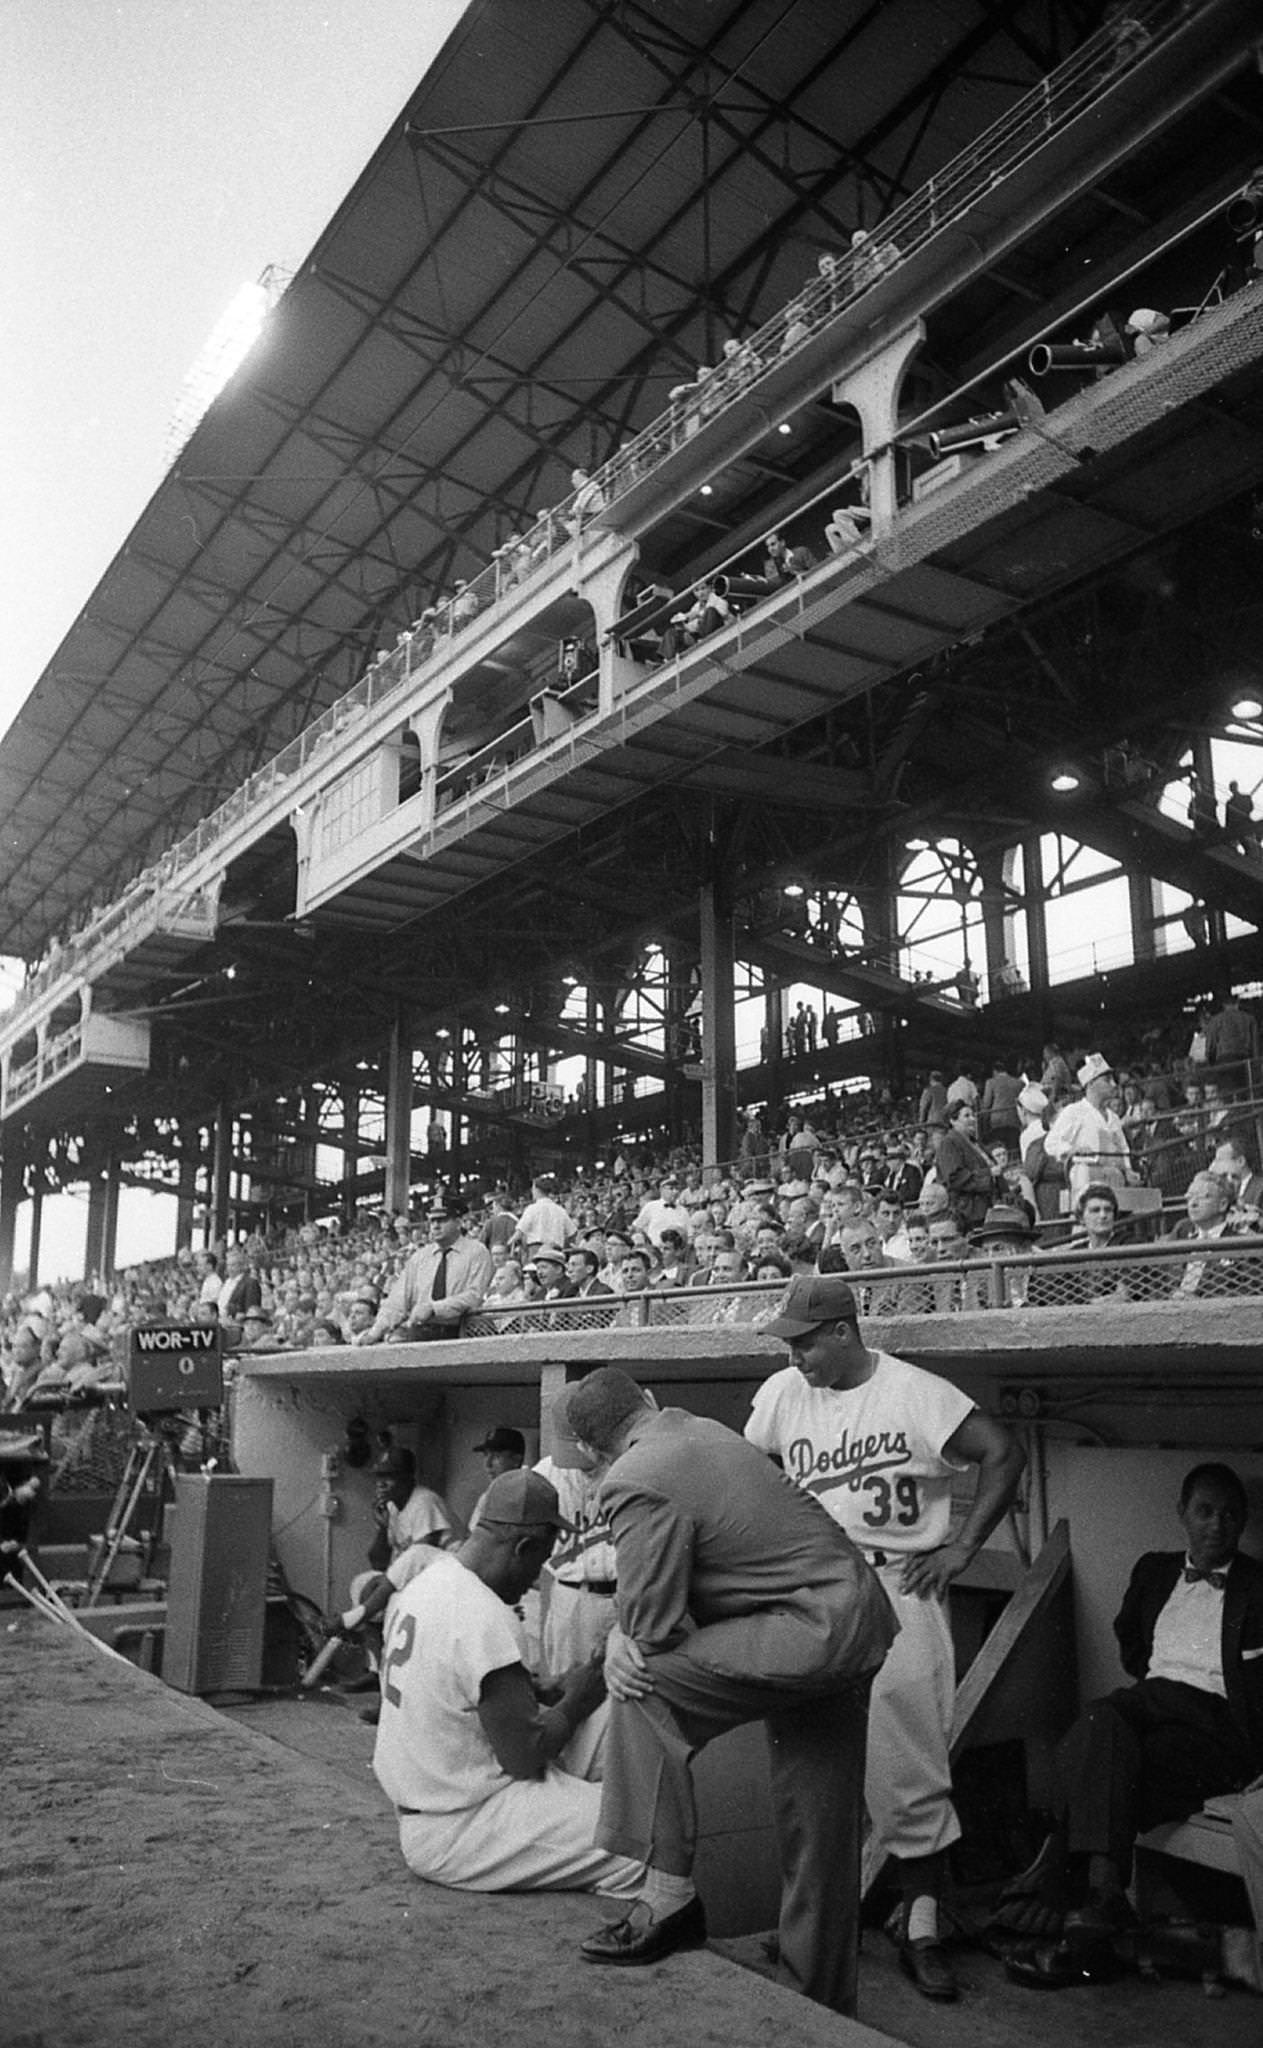 Jackie Robinson In The Dugout Vs St. Louis Cardinals At Ebbets Field, Brooklyn, 1956.